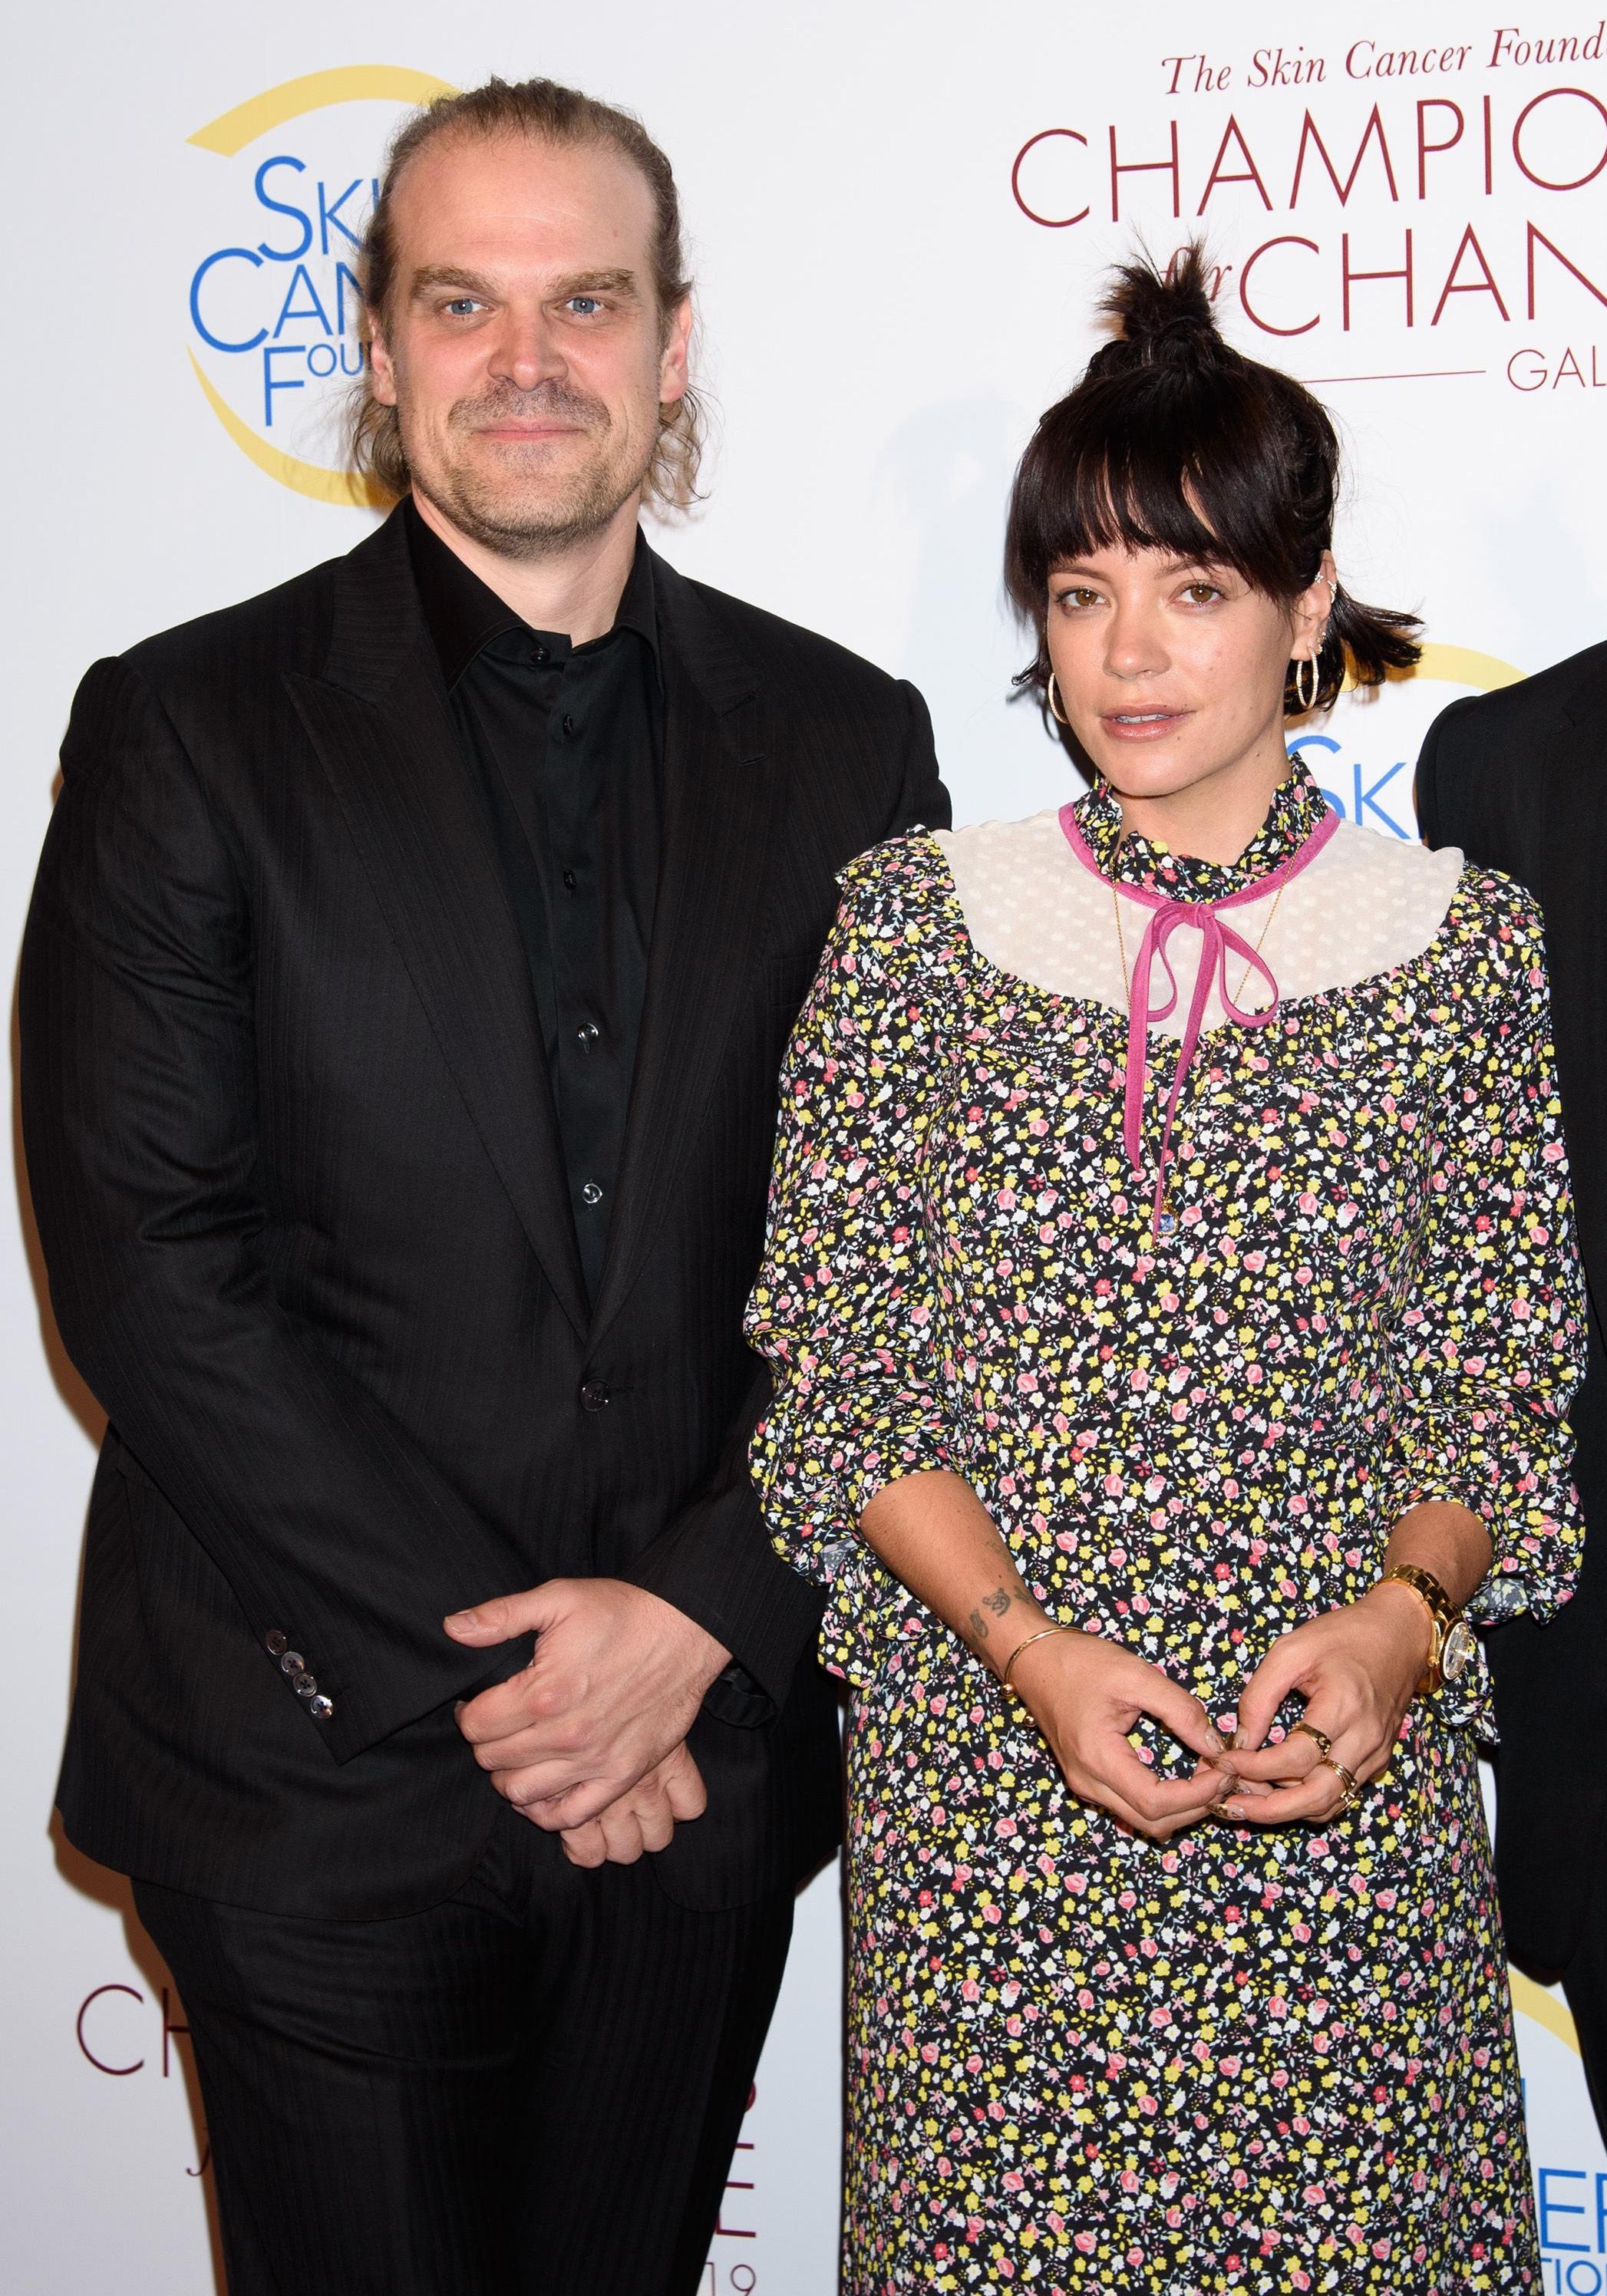 Lily Allen makes red carpet debut with new partner David Harbour - The Irish News